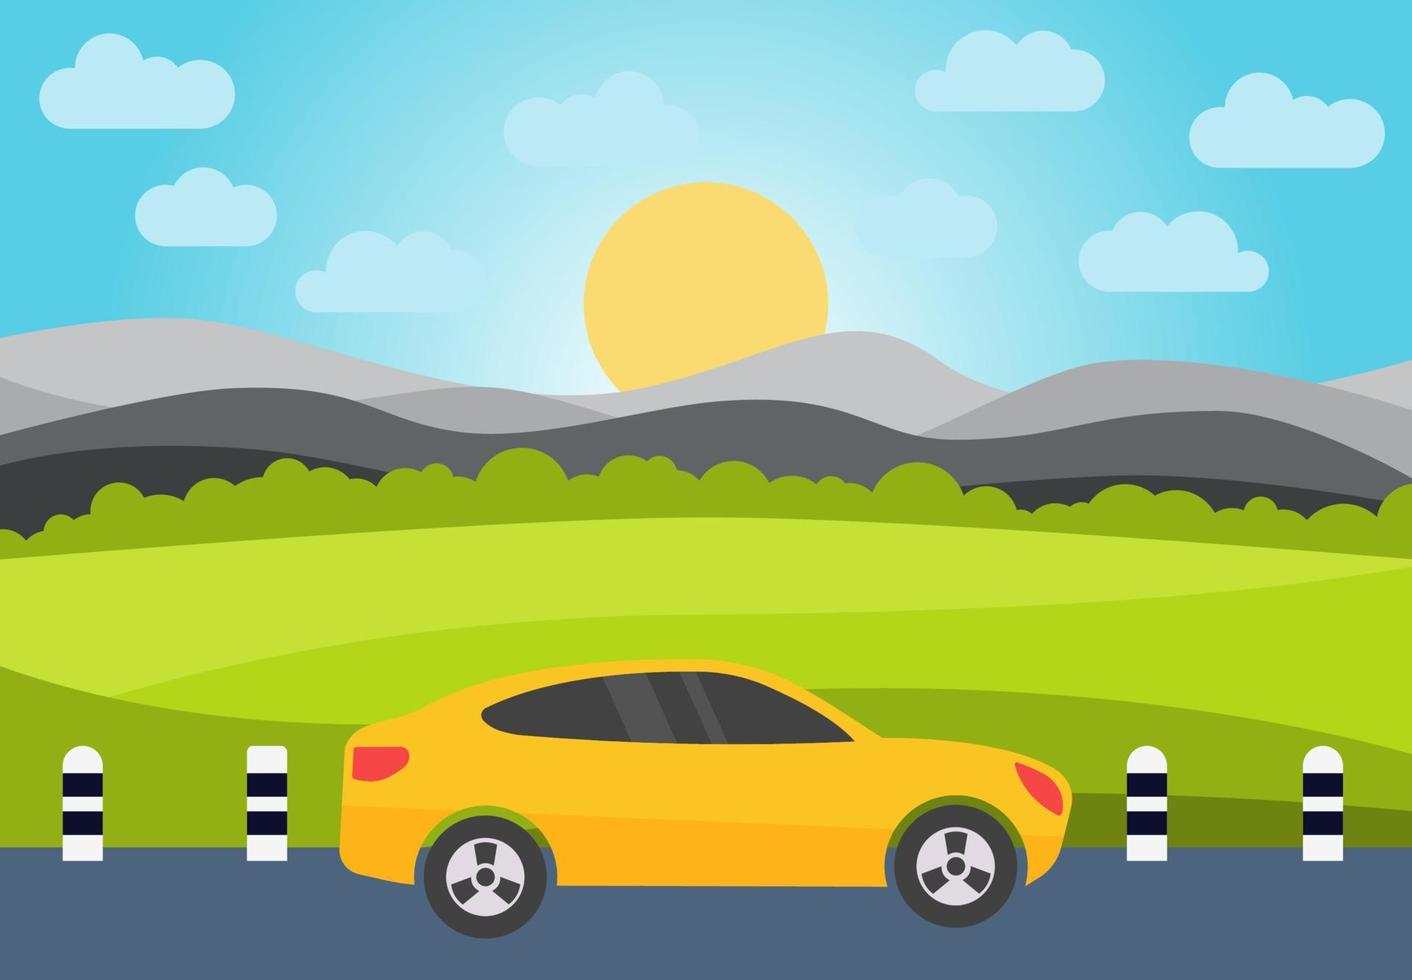 Yellow car on the road against the backdrop of the hills and the rising sun. Vector illustration.